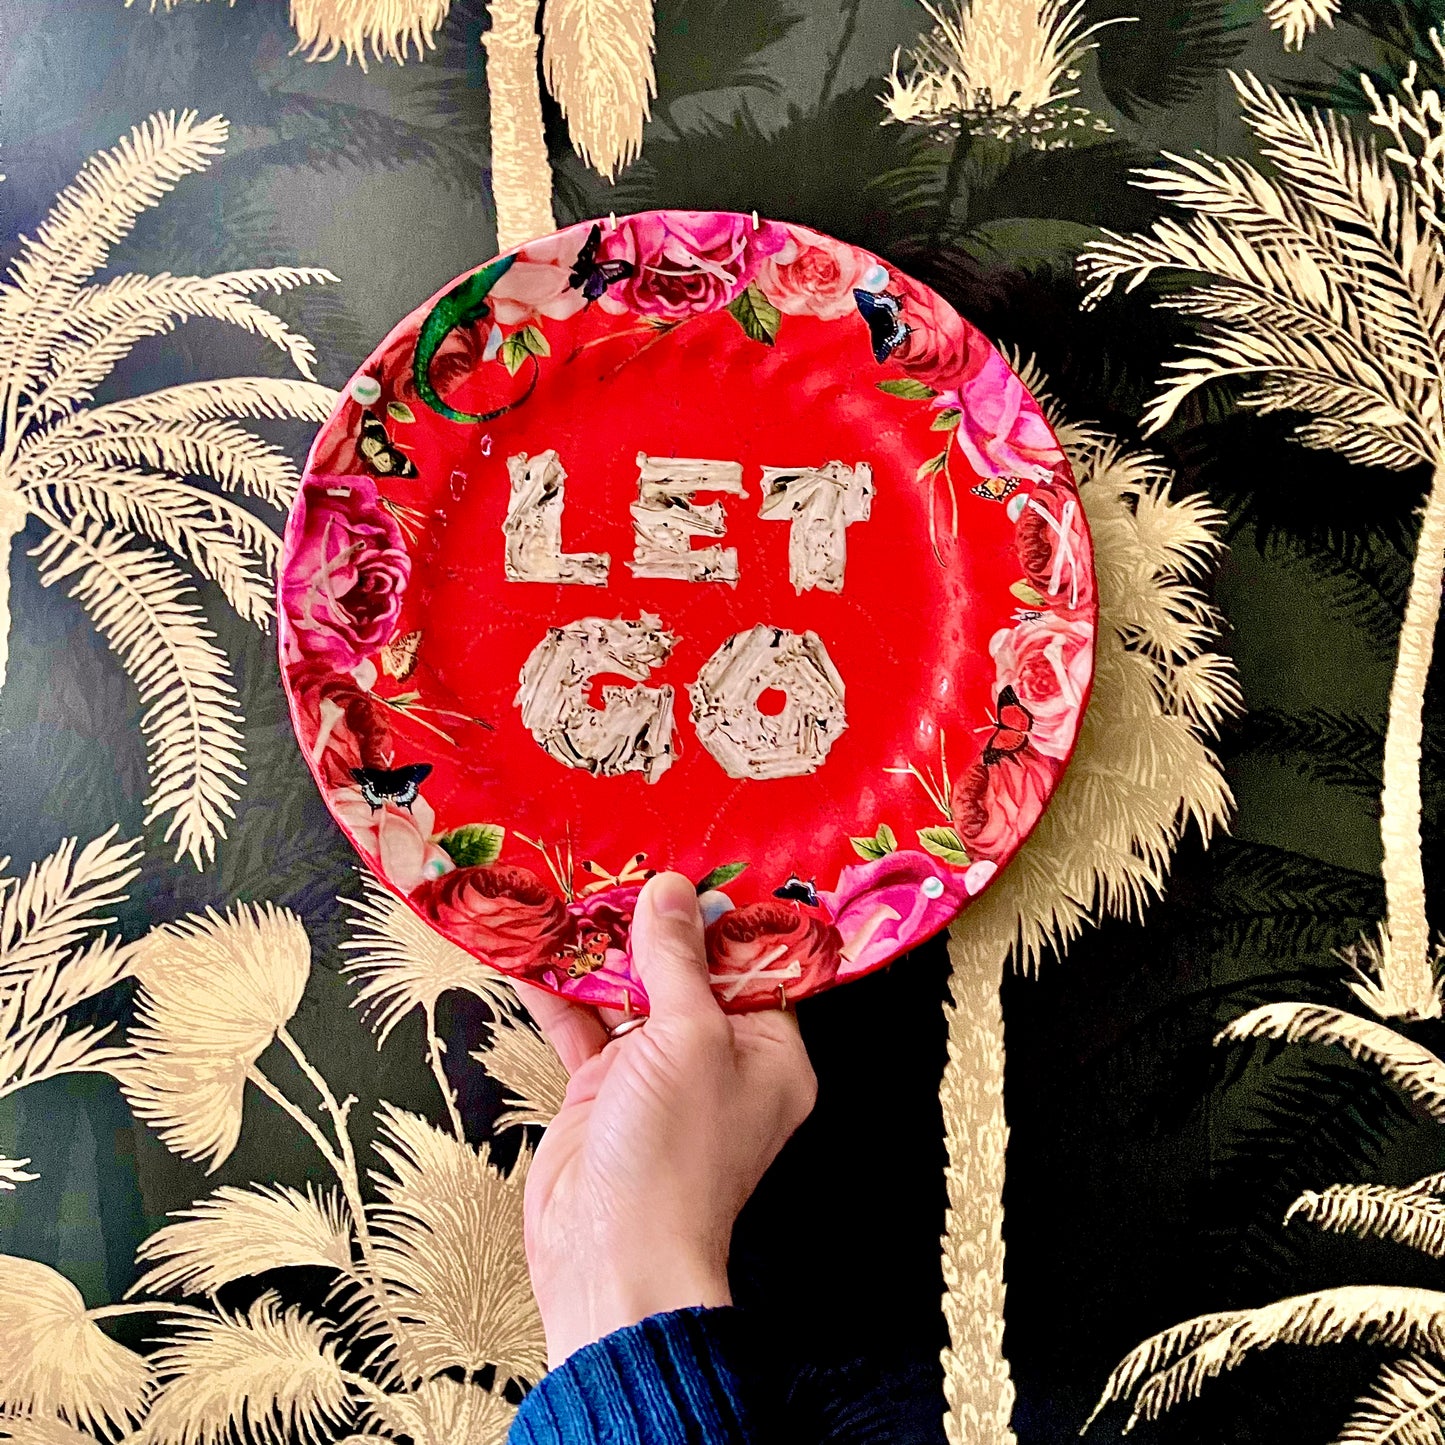 "Let Go" Wall Plate by House of Frisson on hand against a wallpaper.